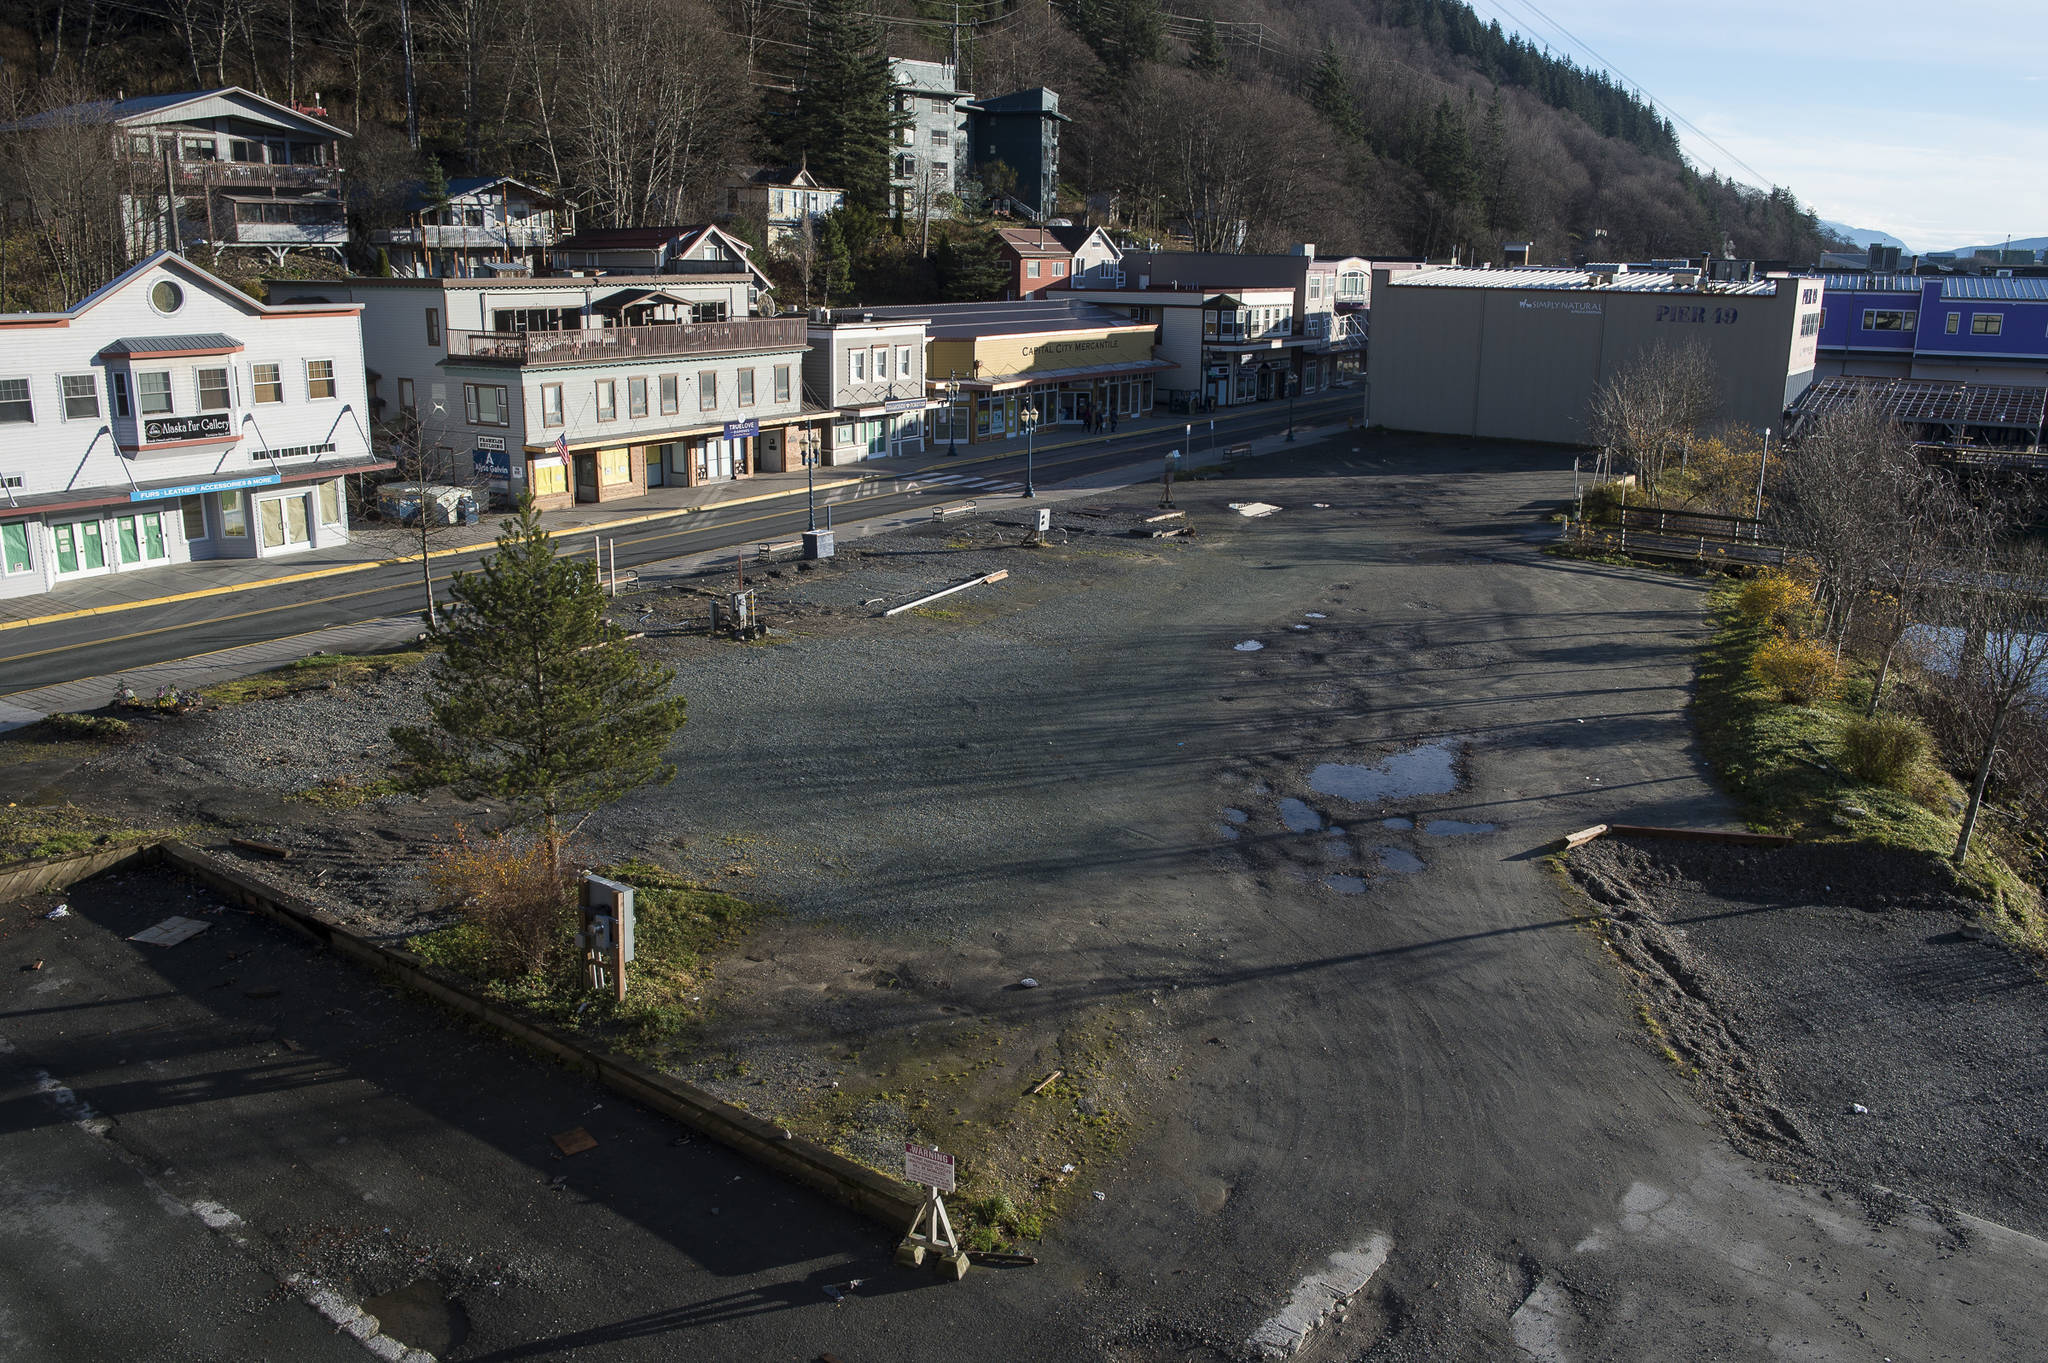 Assembly grapples with future of tourism capacity in Juneau, approves waterfront development project